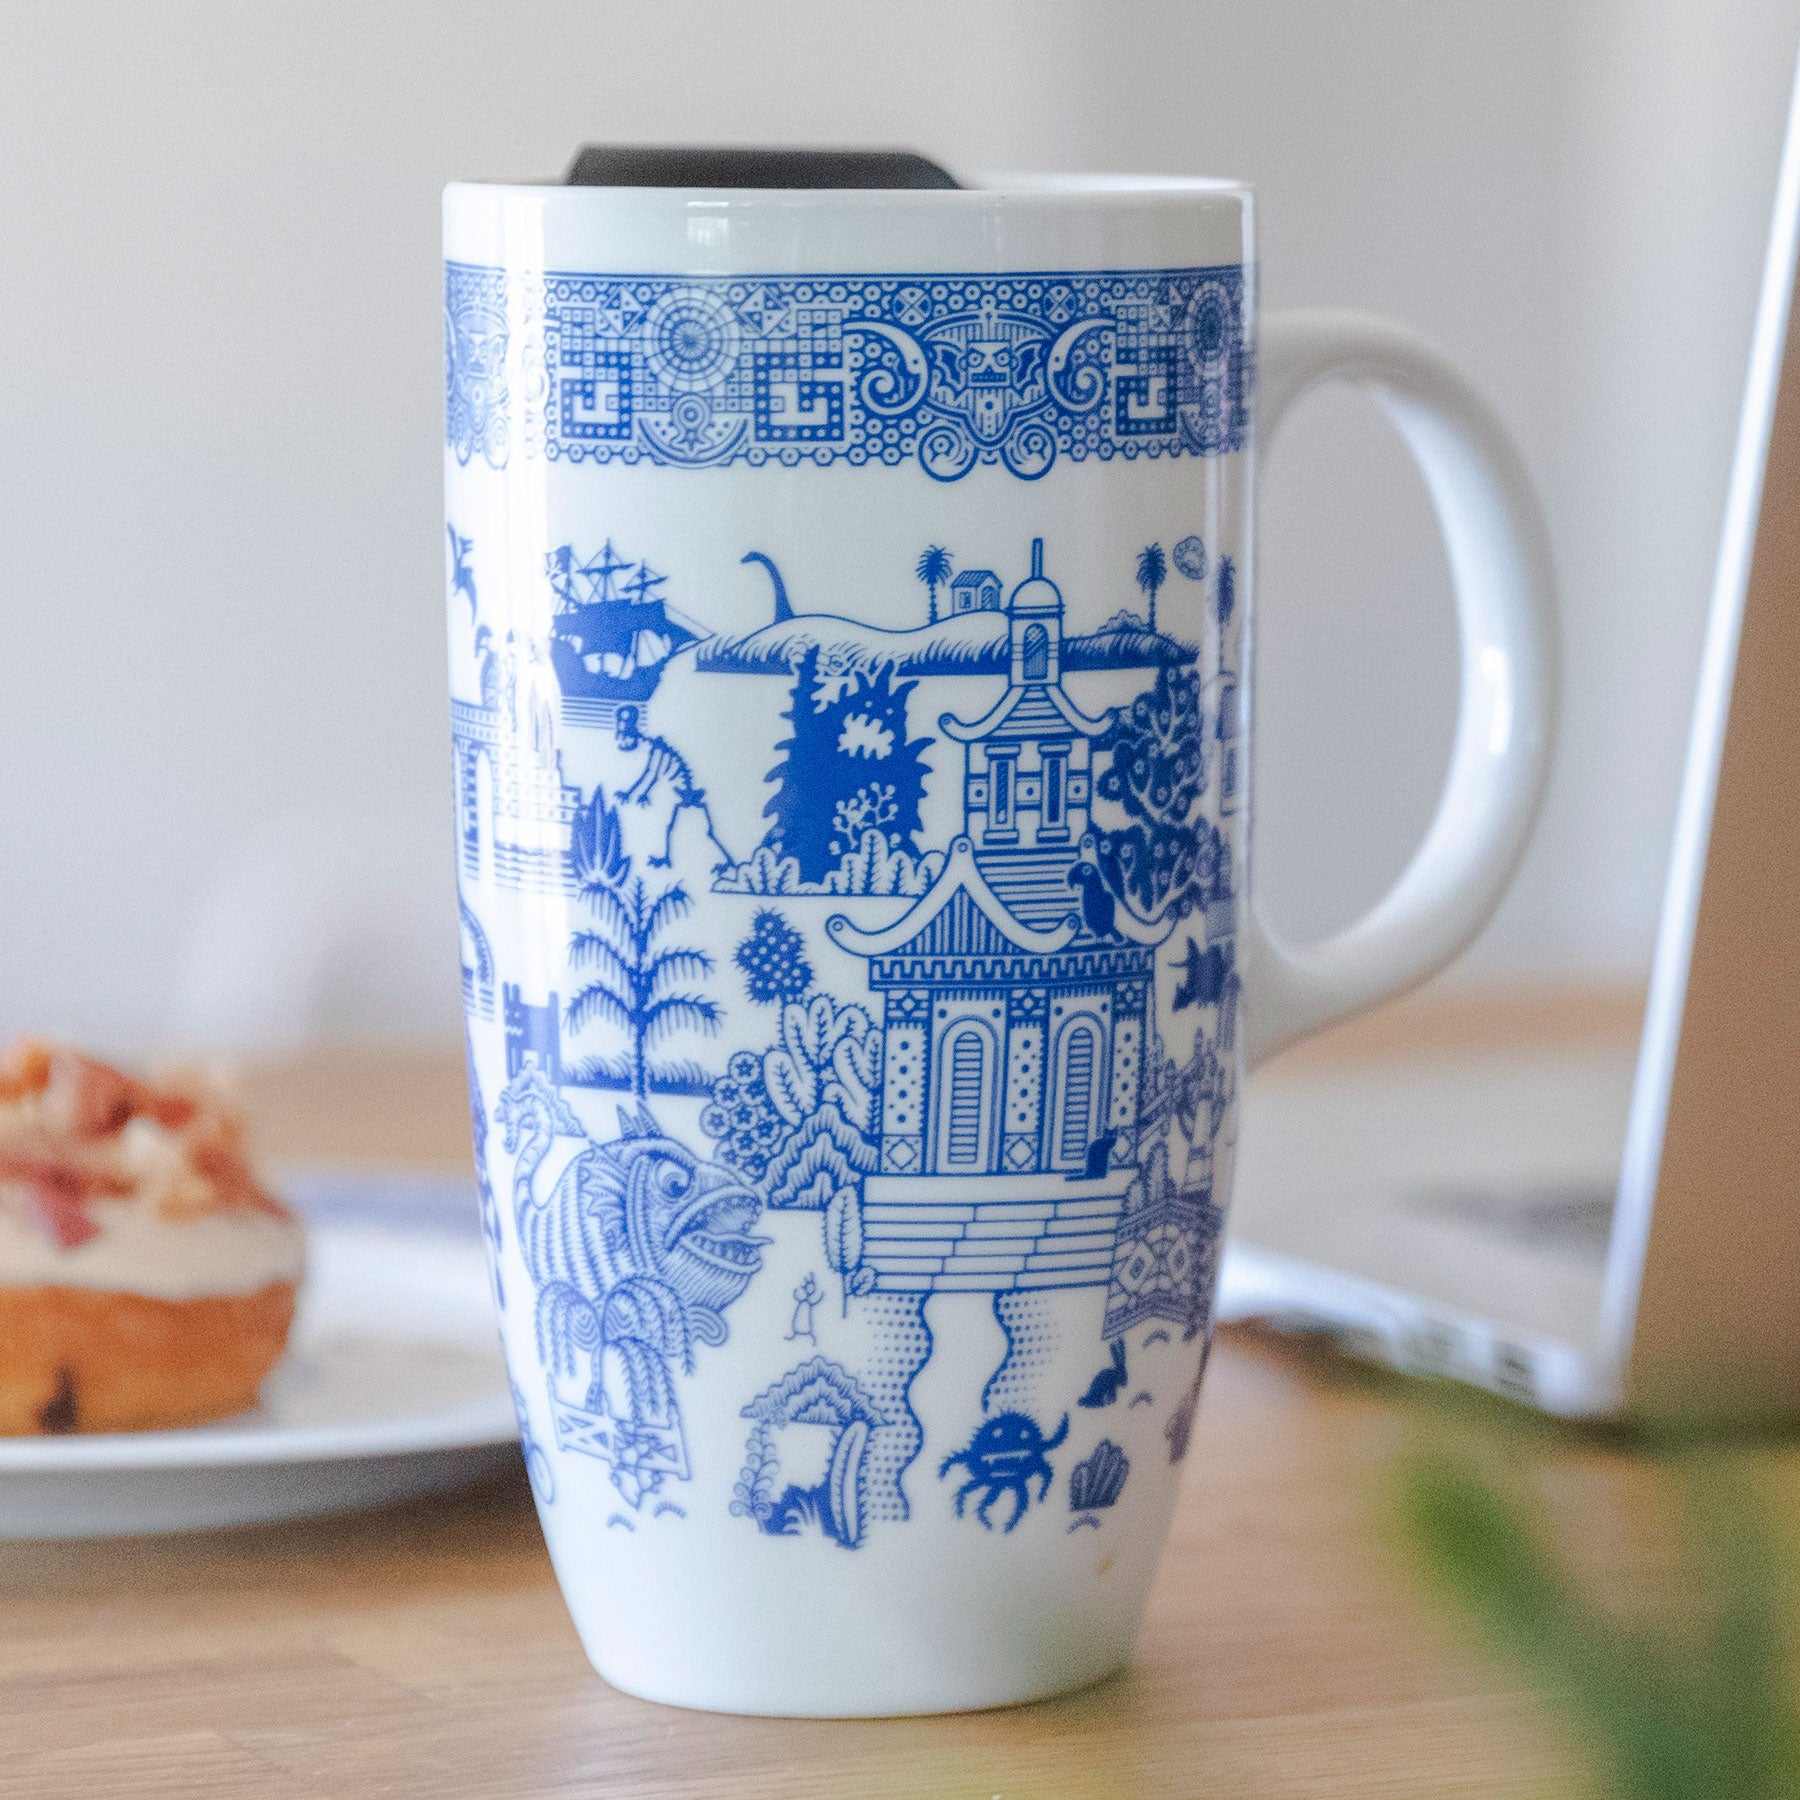 Best Ceramic Travel Coffee Mugs 2024: One for the Road!